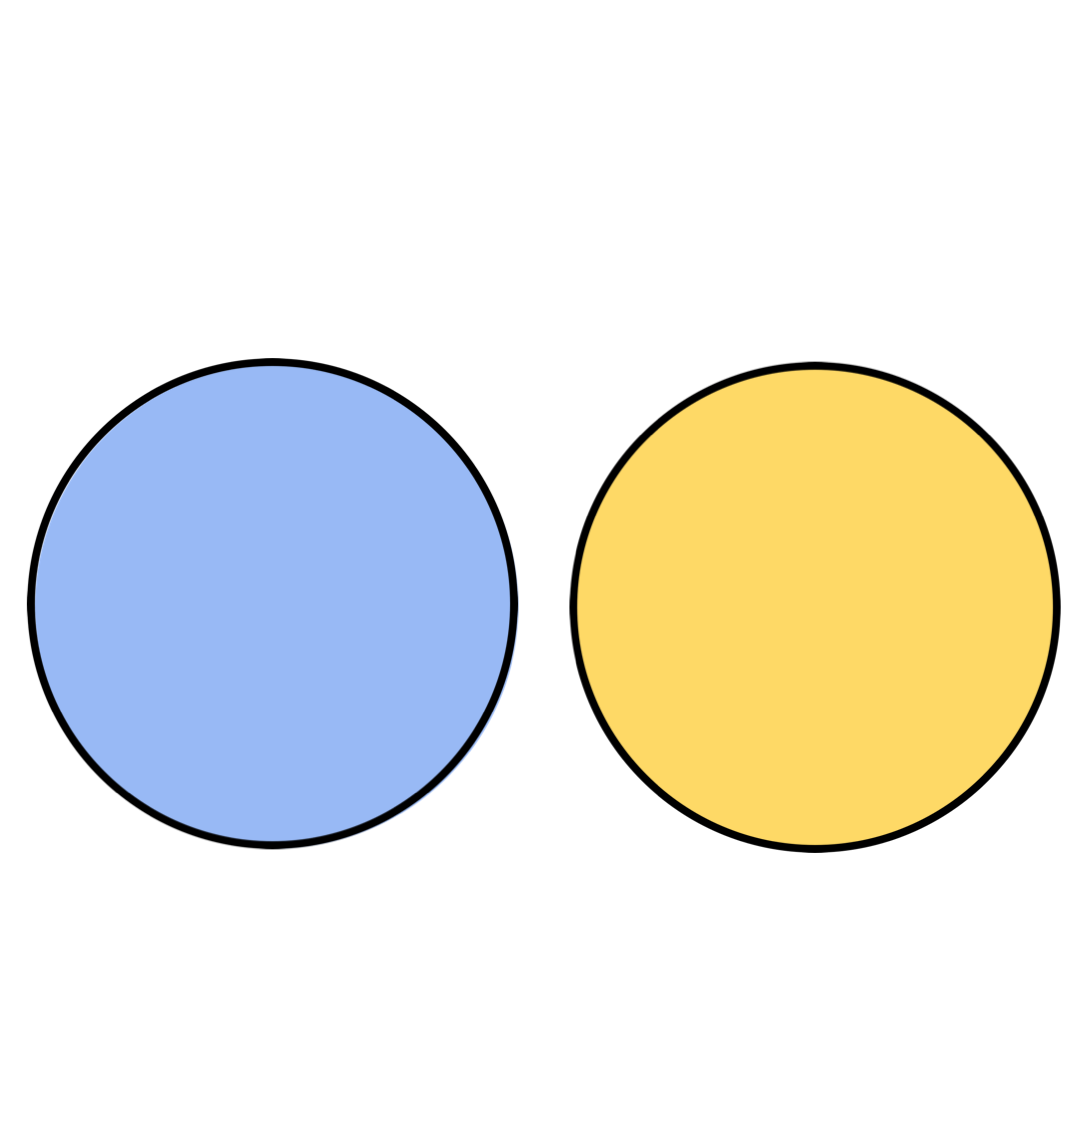 venn-with-no-overlap-differences-blank-template-imgflip